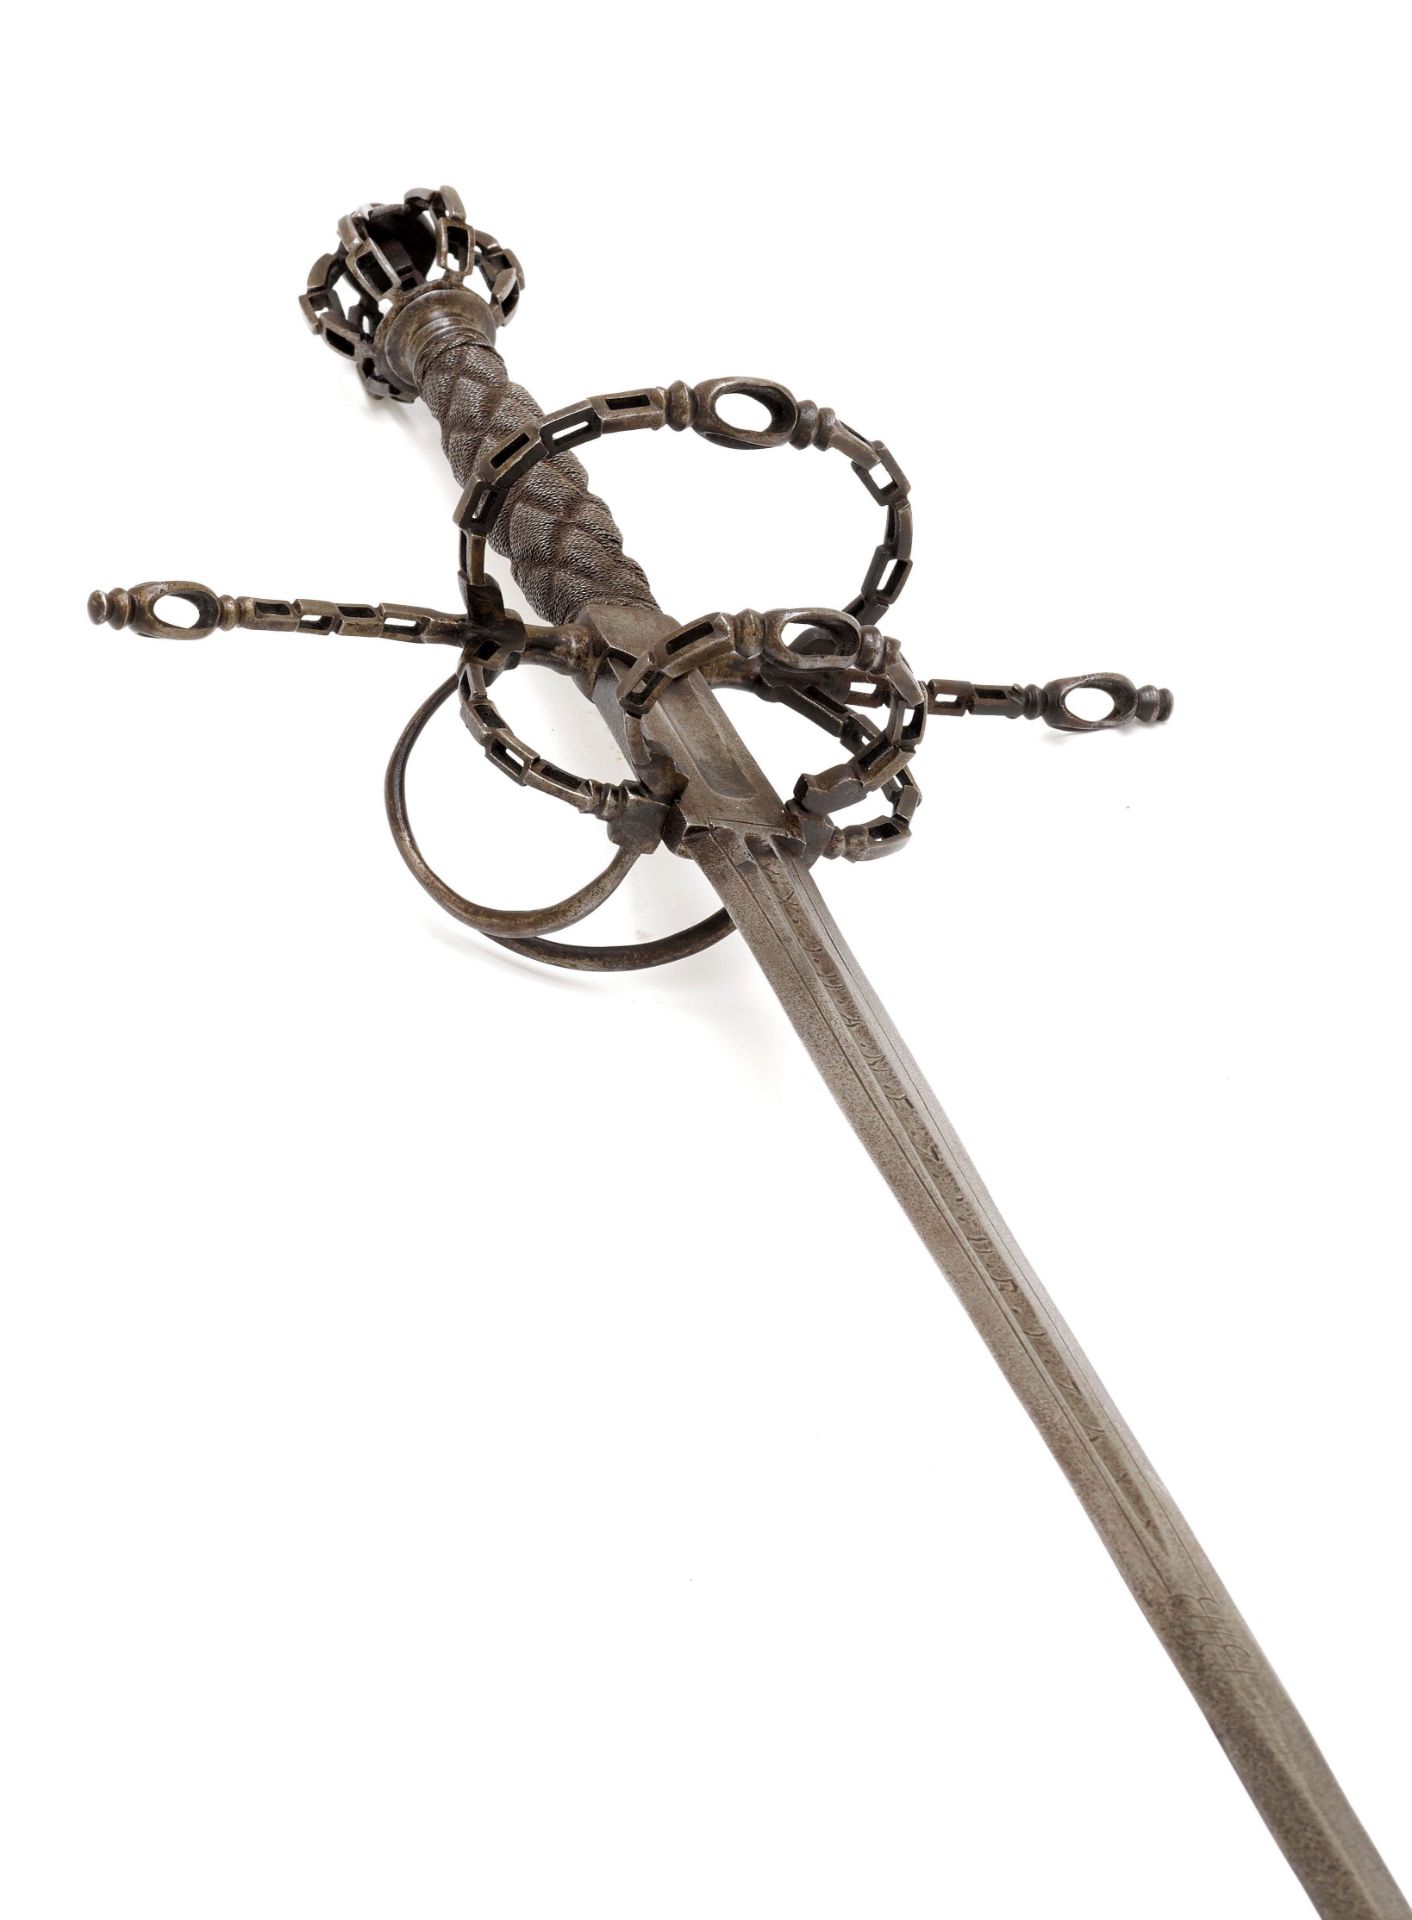 RIDING SWORD - Image 2 of 4